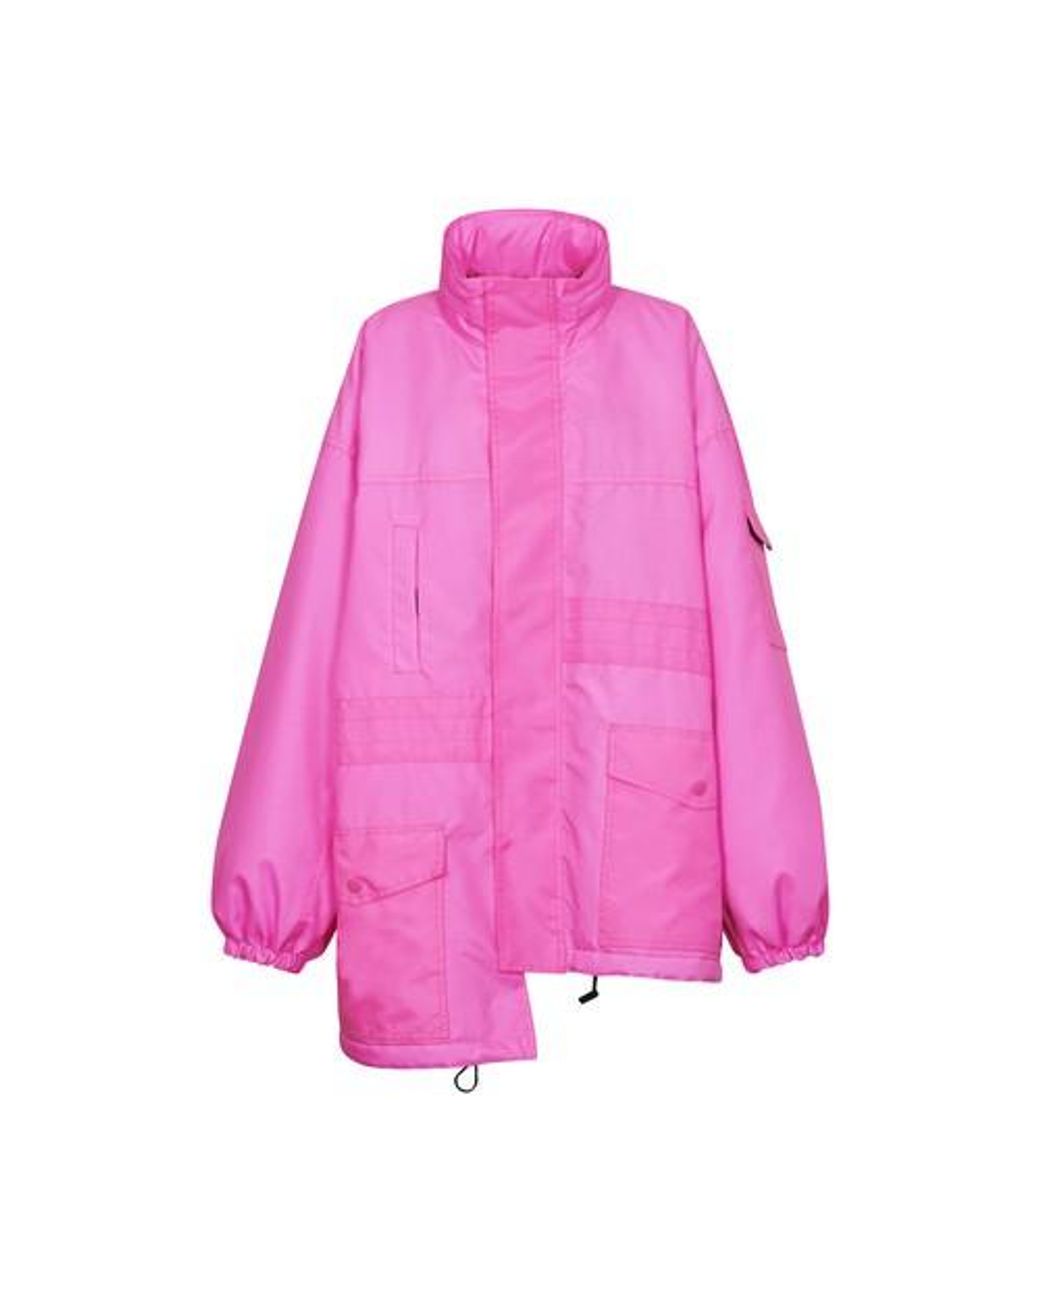 Balenciaga Pulled Parka in Pink for Men - Lyst